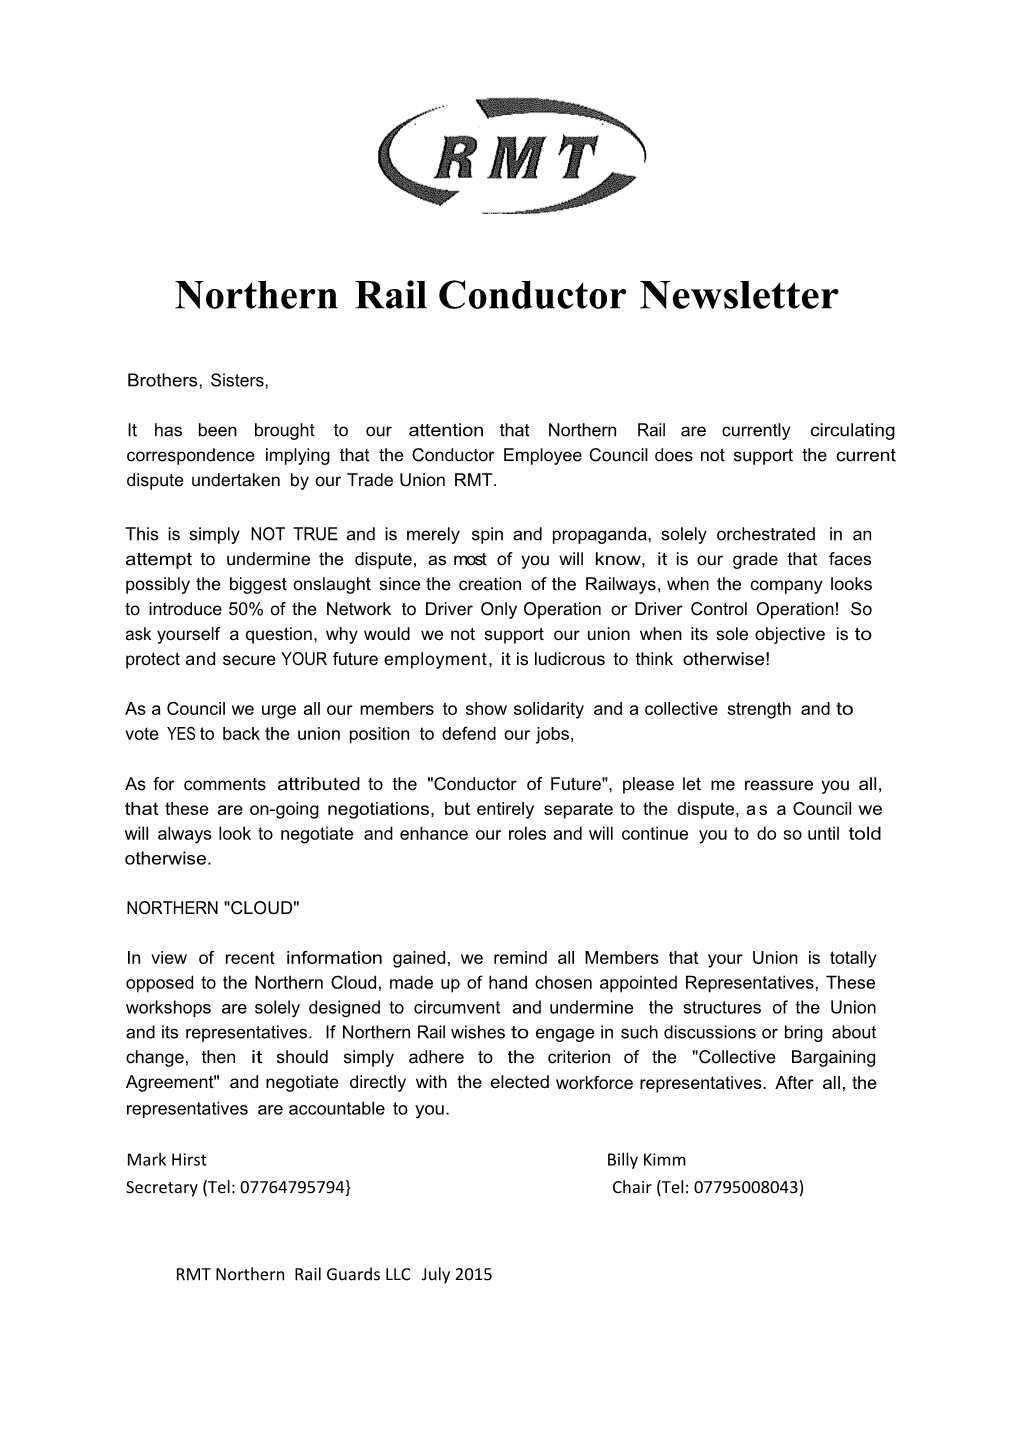 Northern Rail Conductor Newsletter